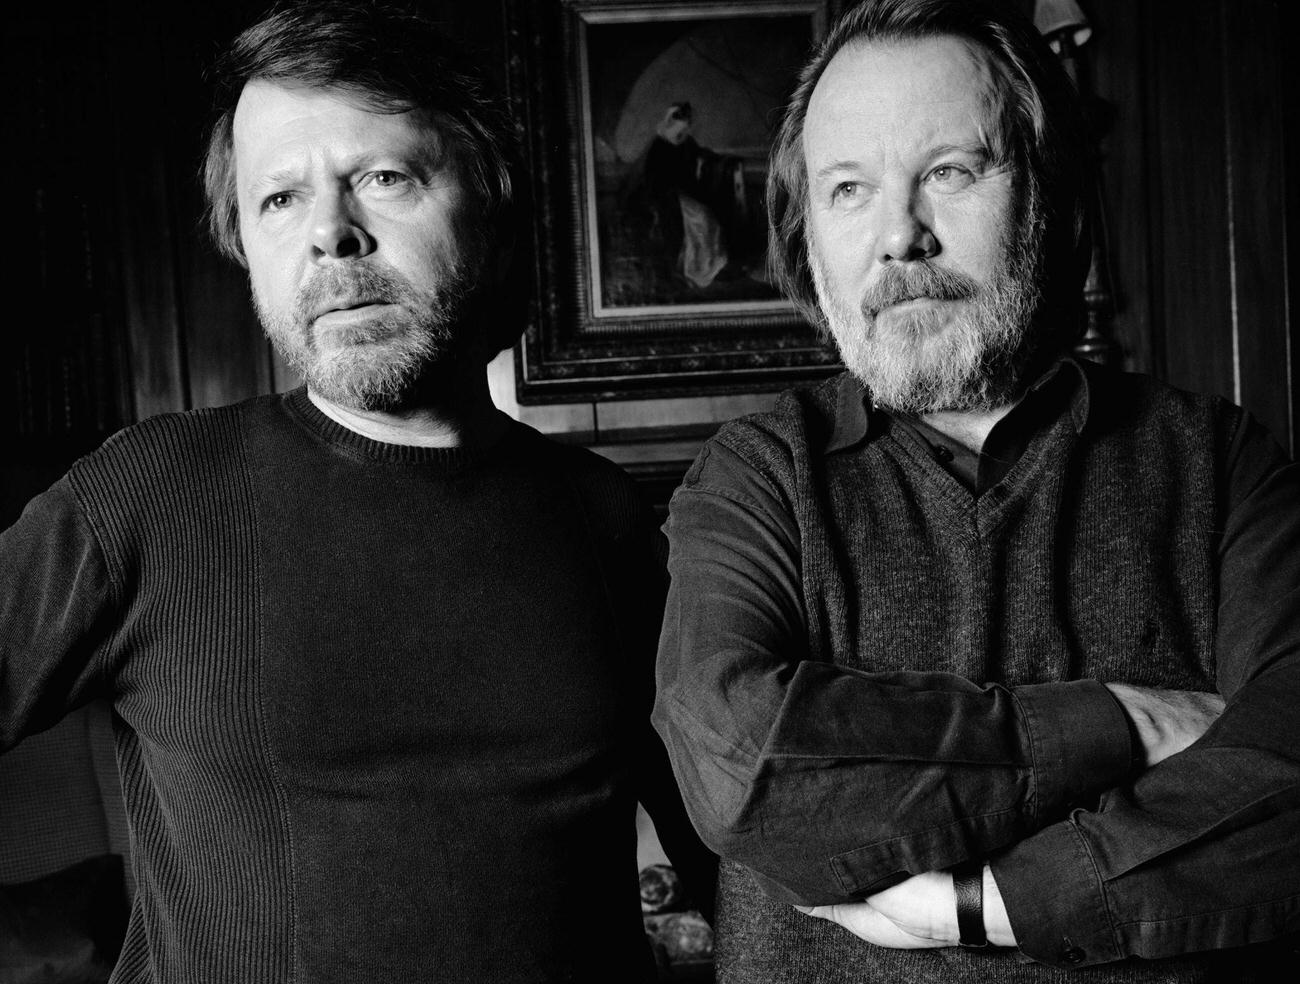 Bjorn Ulvaeus (left) and Benny Andersson of Swedish pop group ABBA, 1999.